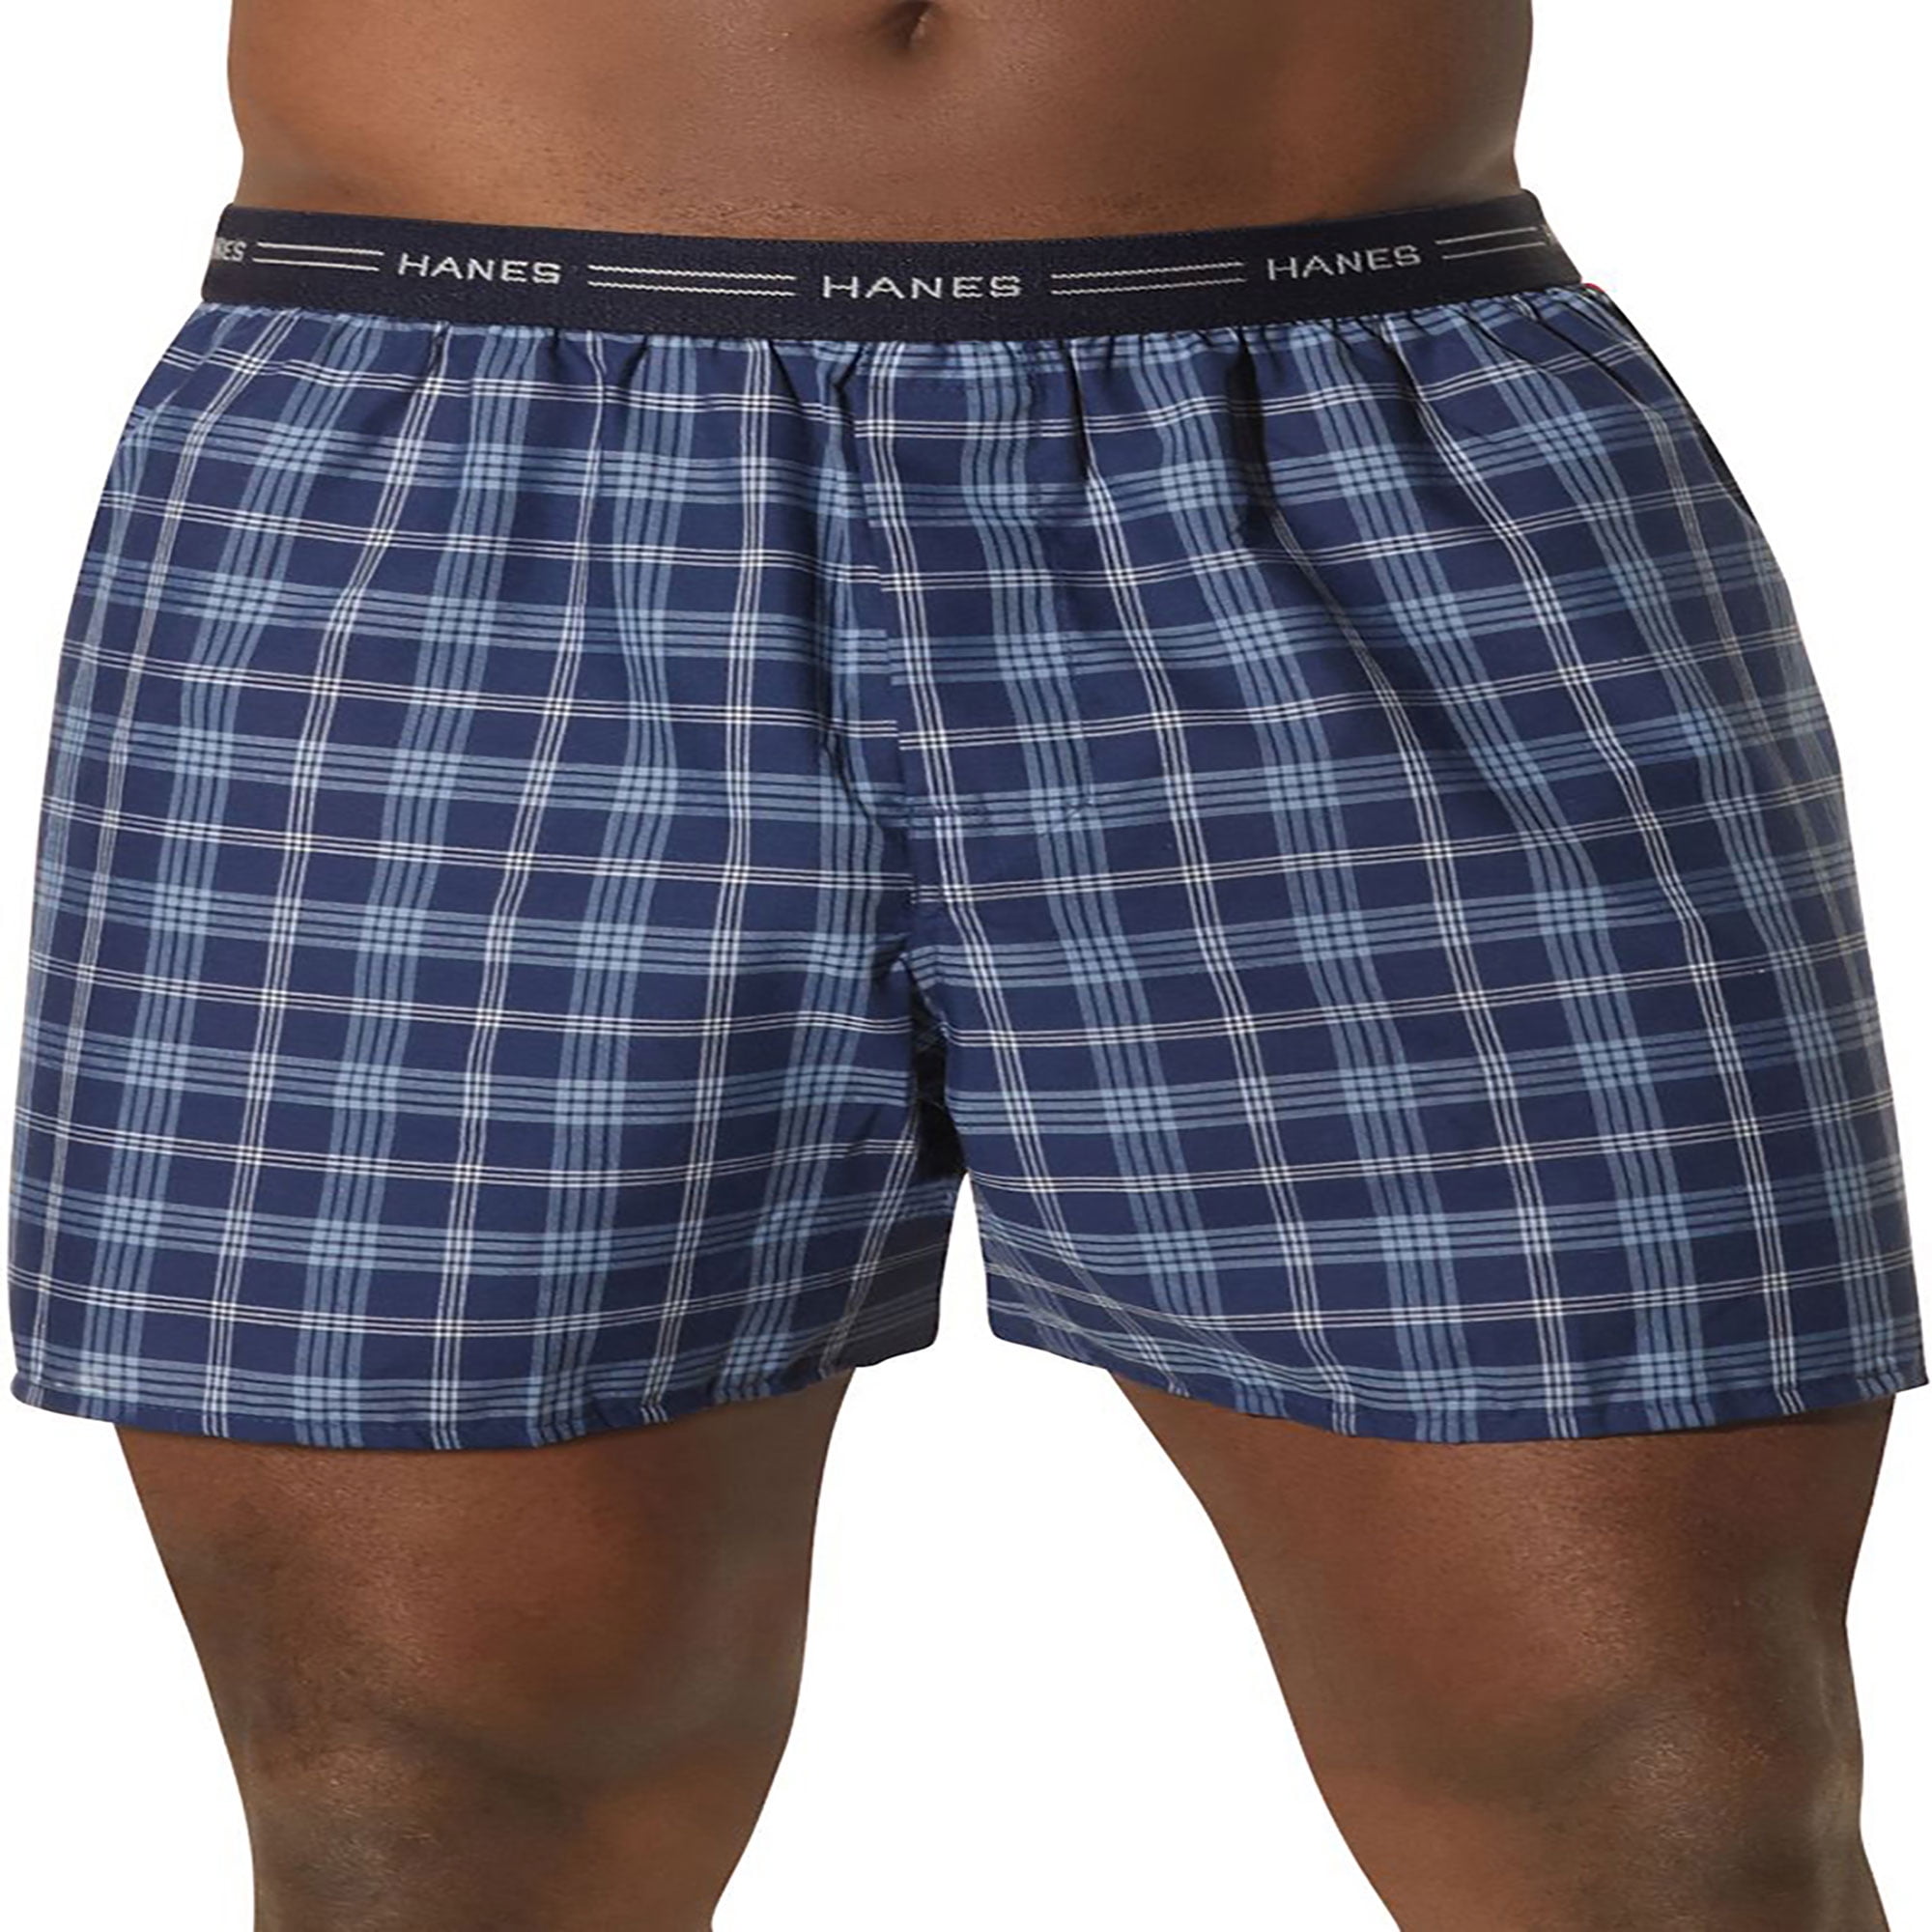 Hanes Men's Yarn Dyed Plaid Boxers 5-Pack, Style 841BX5 - Walmart.com